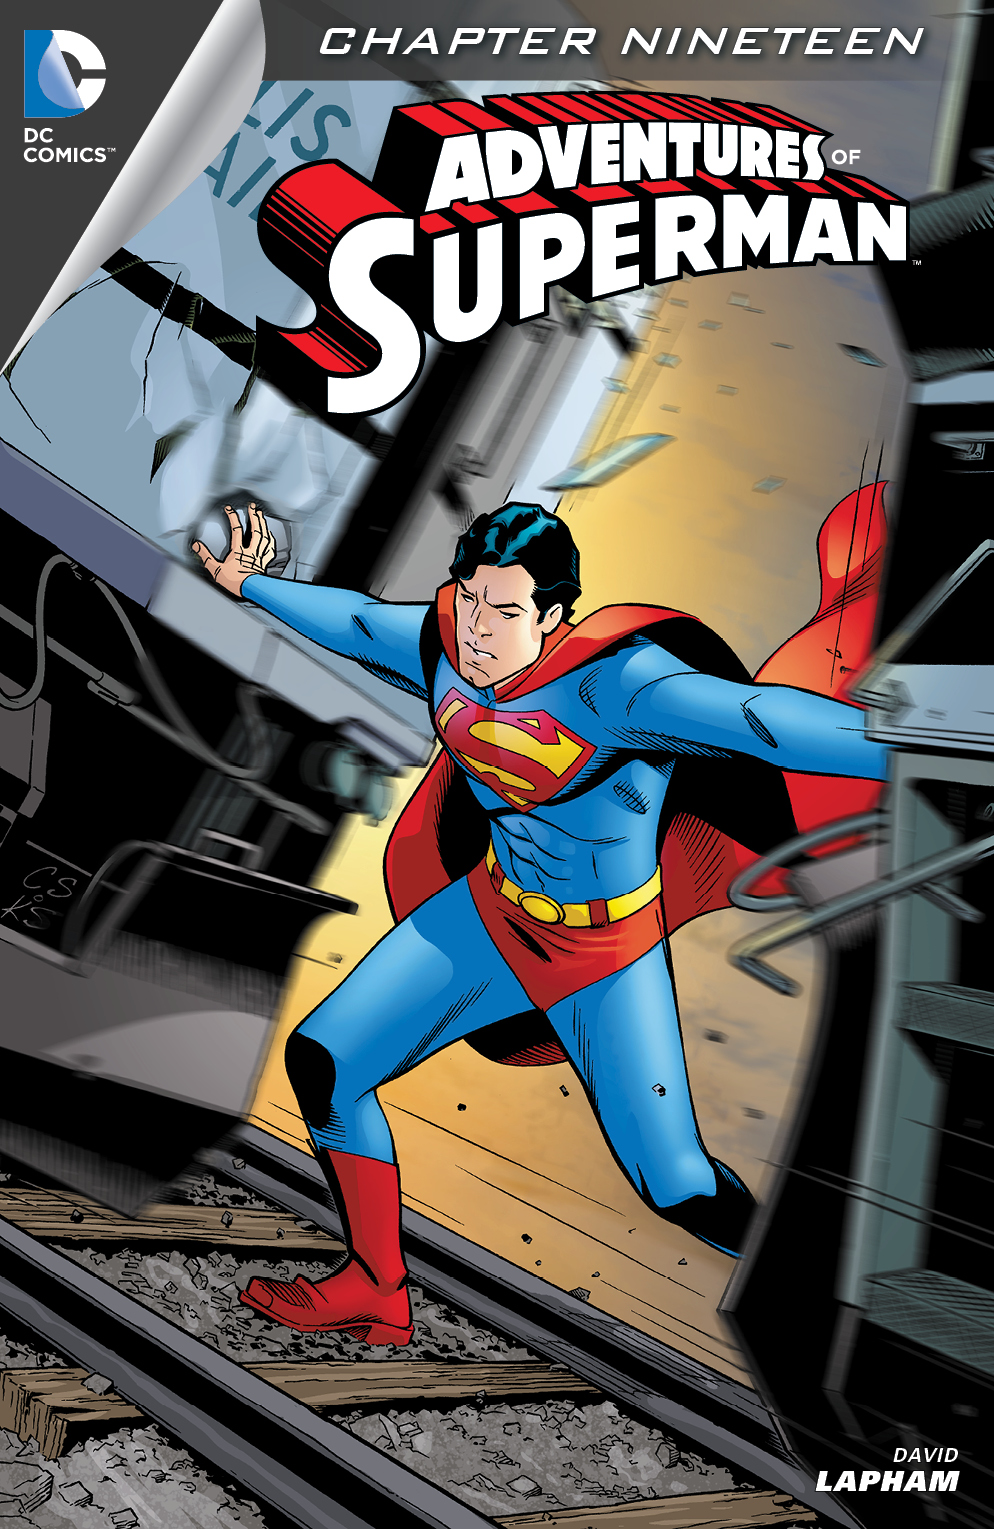 Adventures of Superman (2013-) #19 preview images